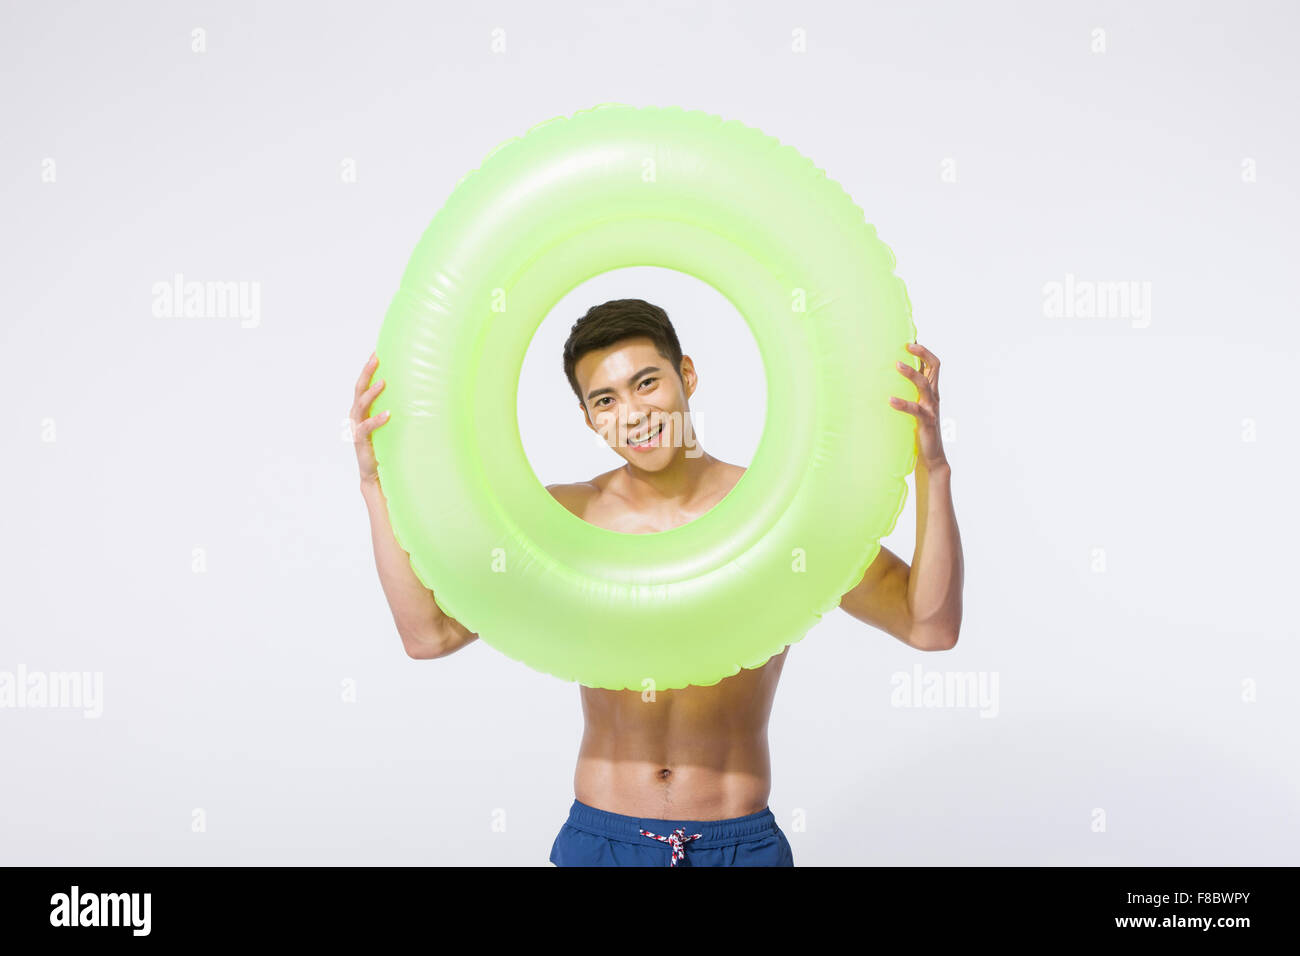 Muscular man in swimming pants holding a ring tube and looking through it Stock Photo